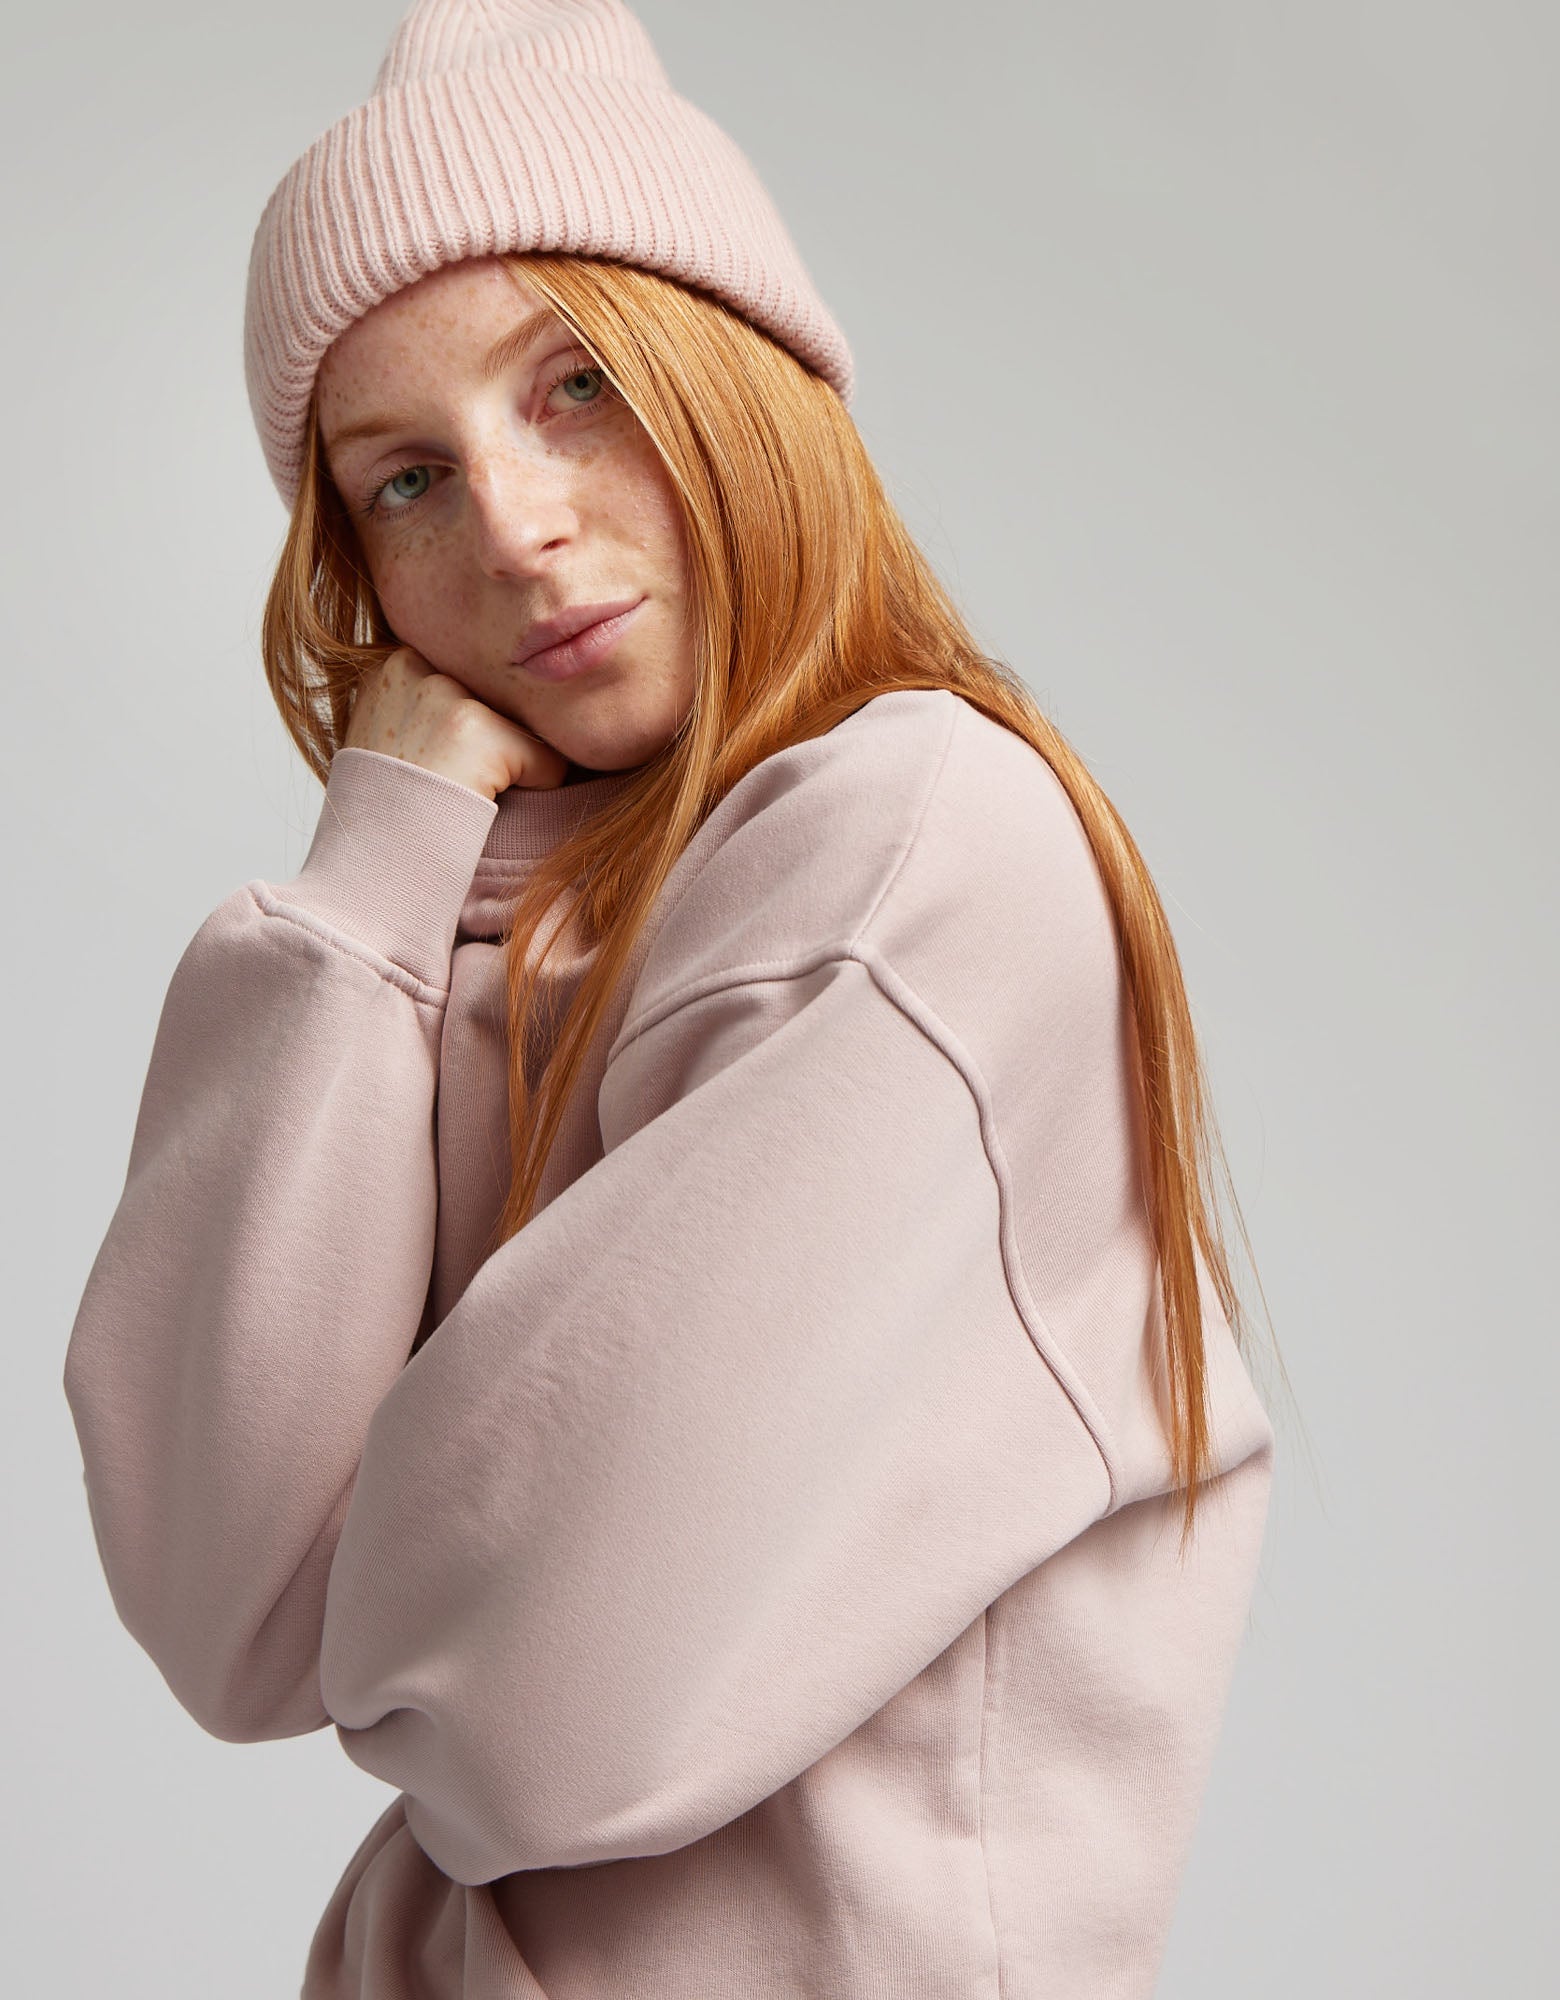 Heliotique | Colorful Standard Merino Wool Beanie - Faded Pink